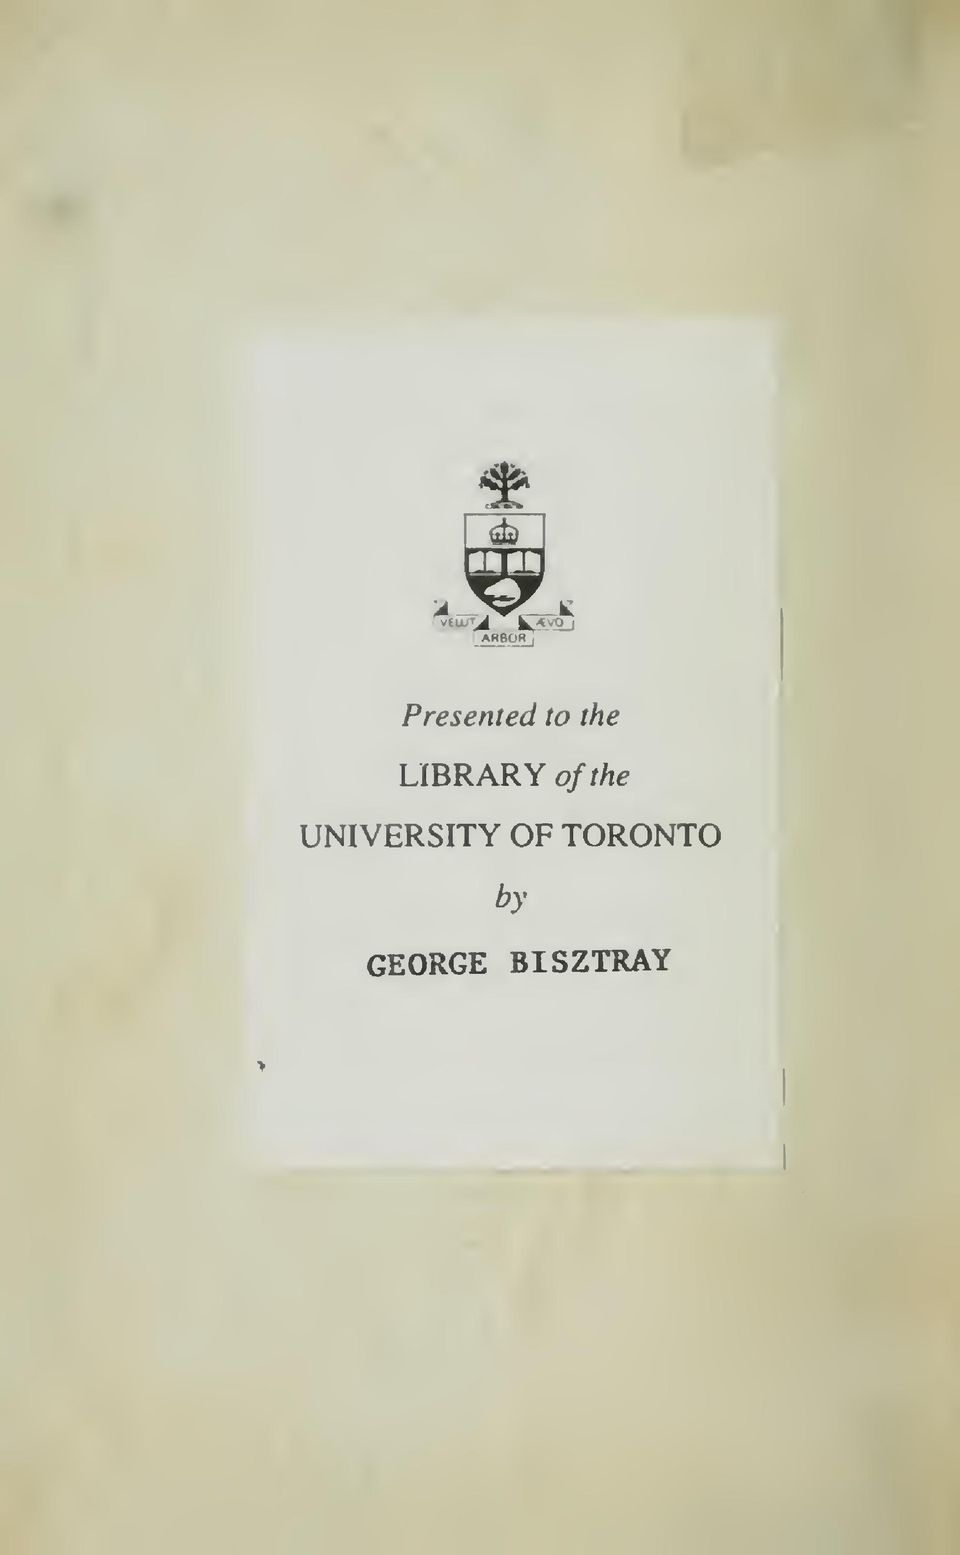 LIBRARY ofthe